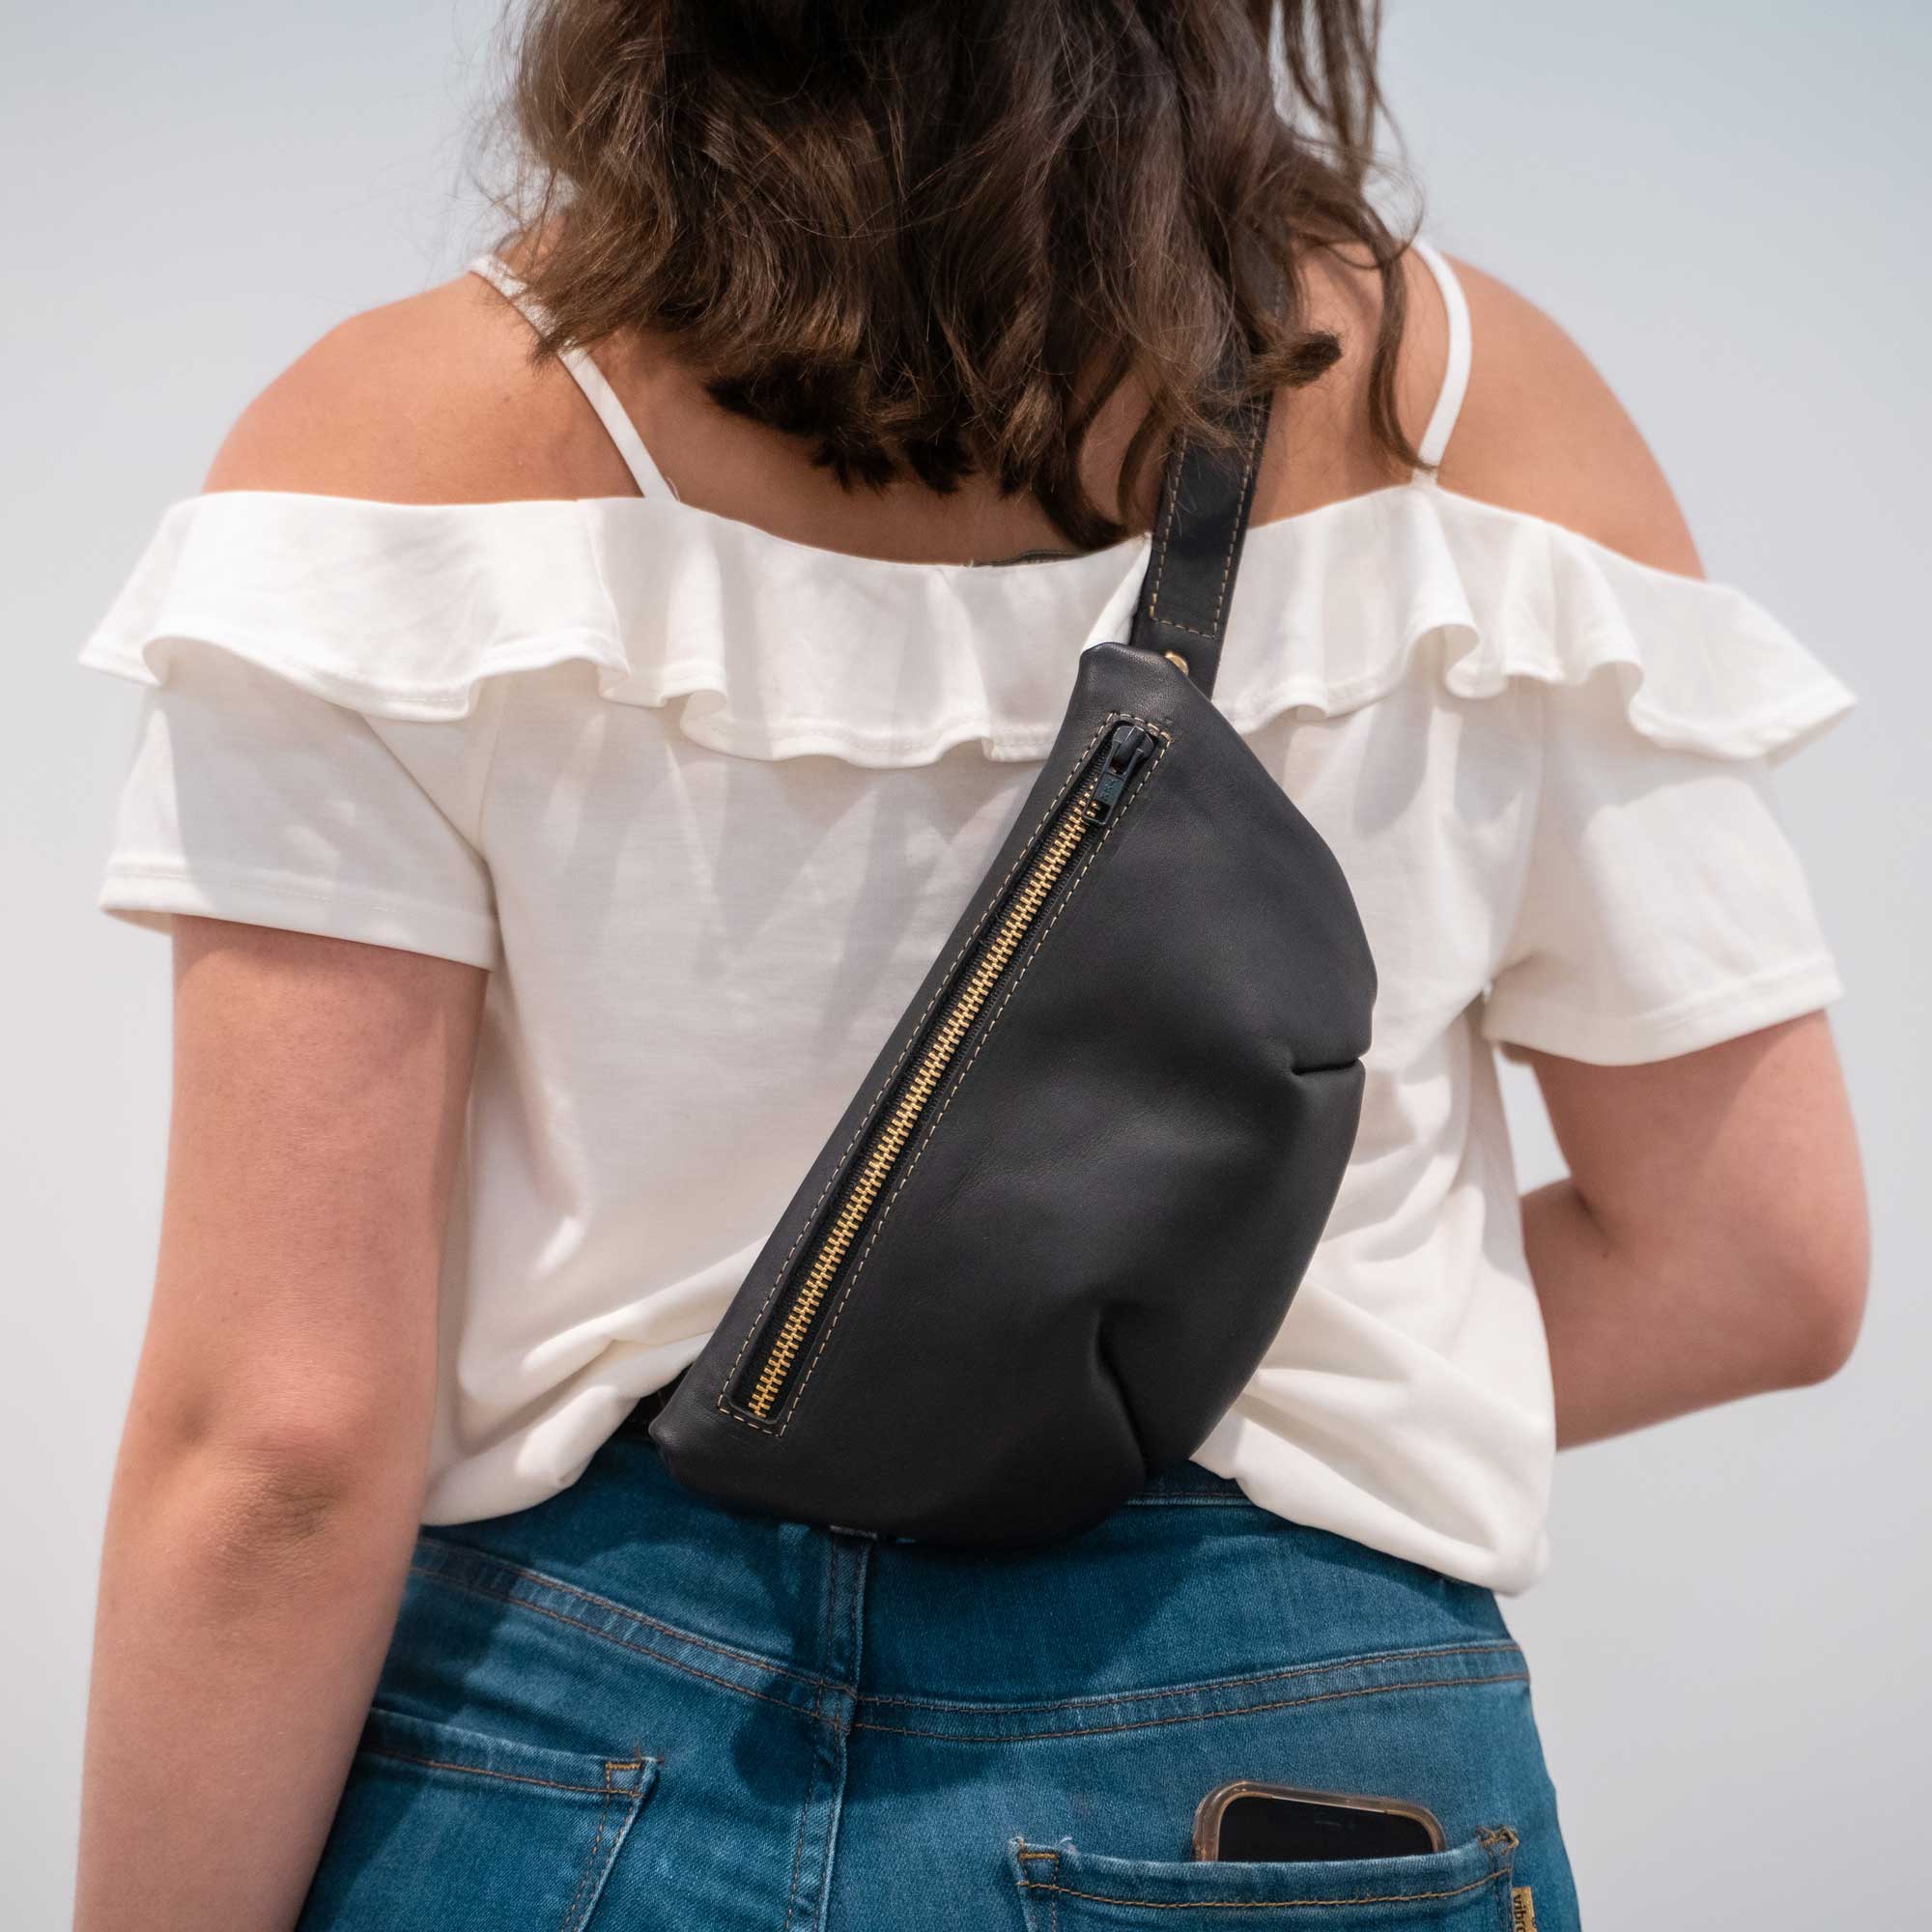 The Sage Crossbody Fanny Pack Bag - Holtz Leather